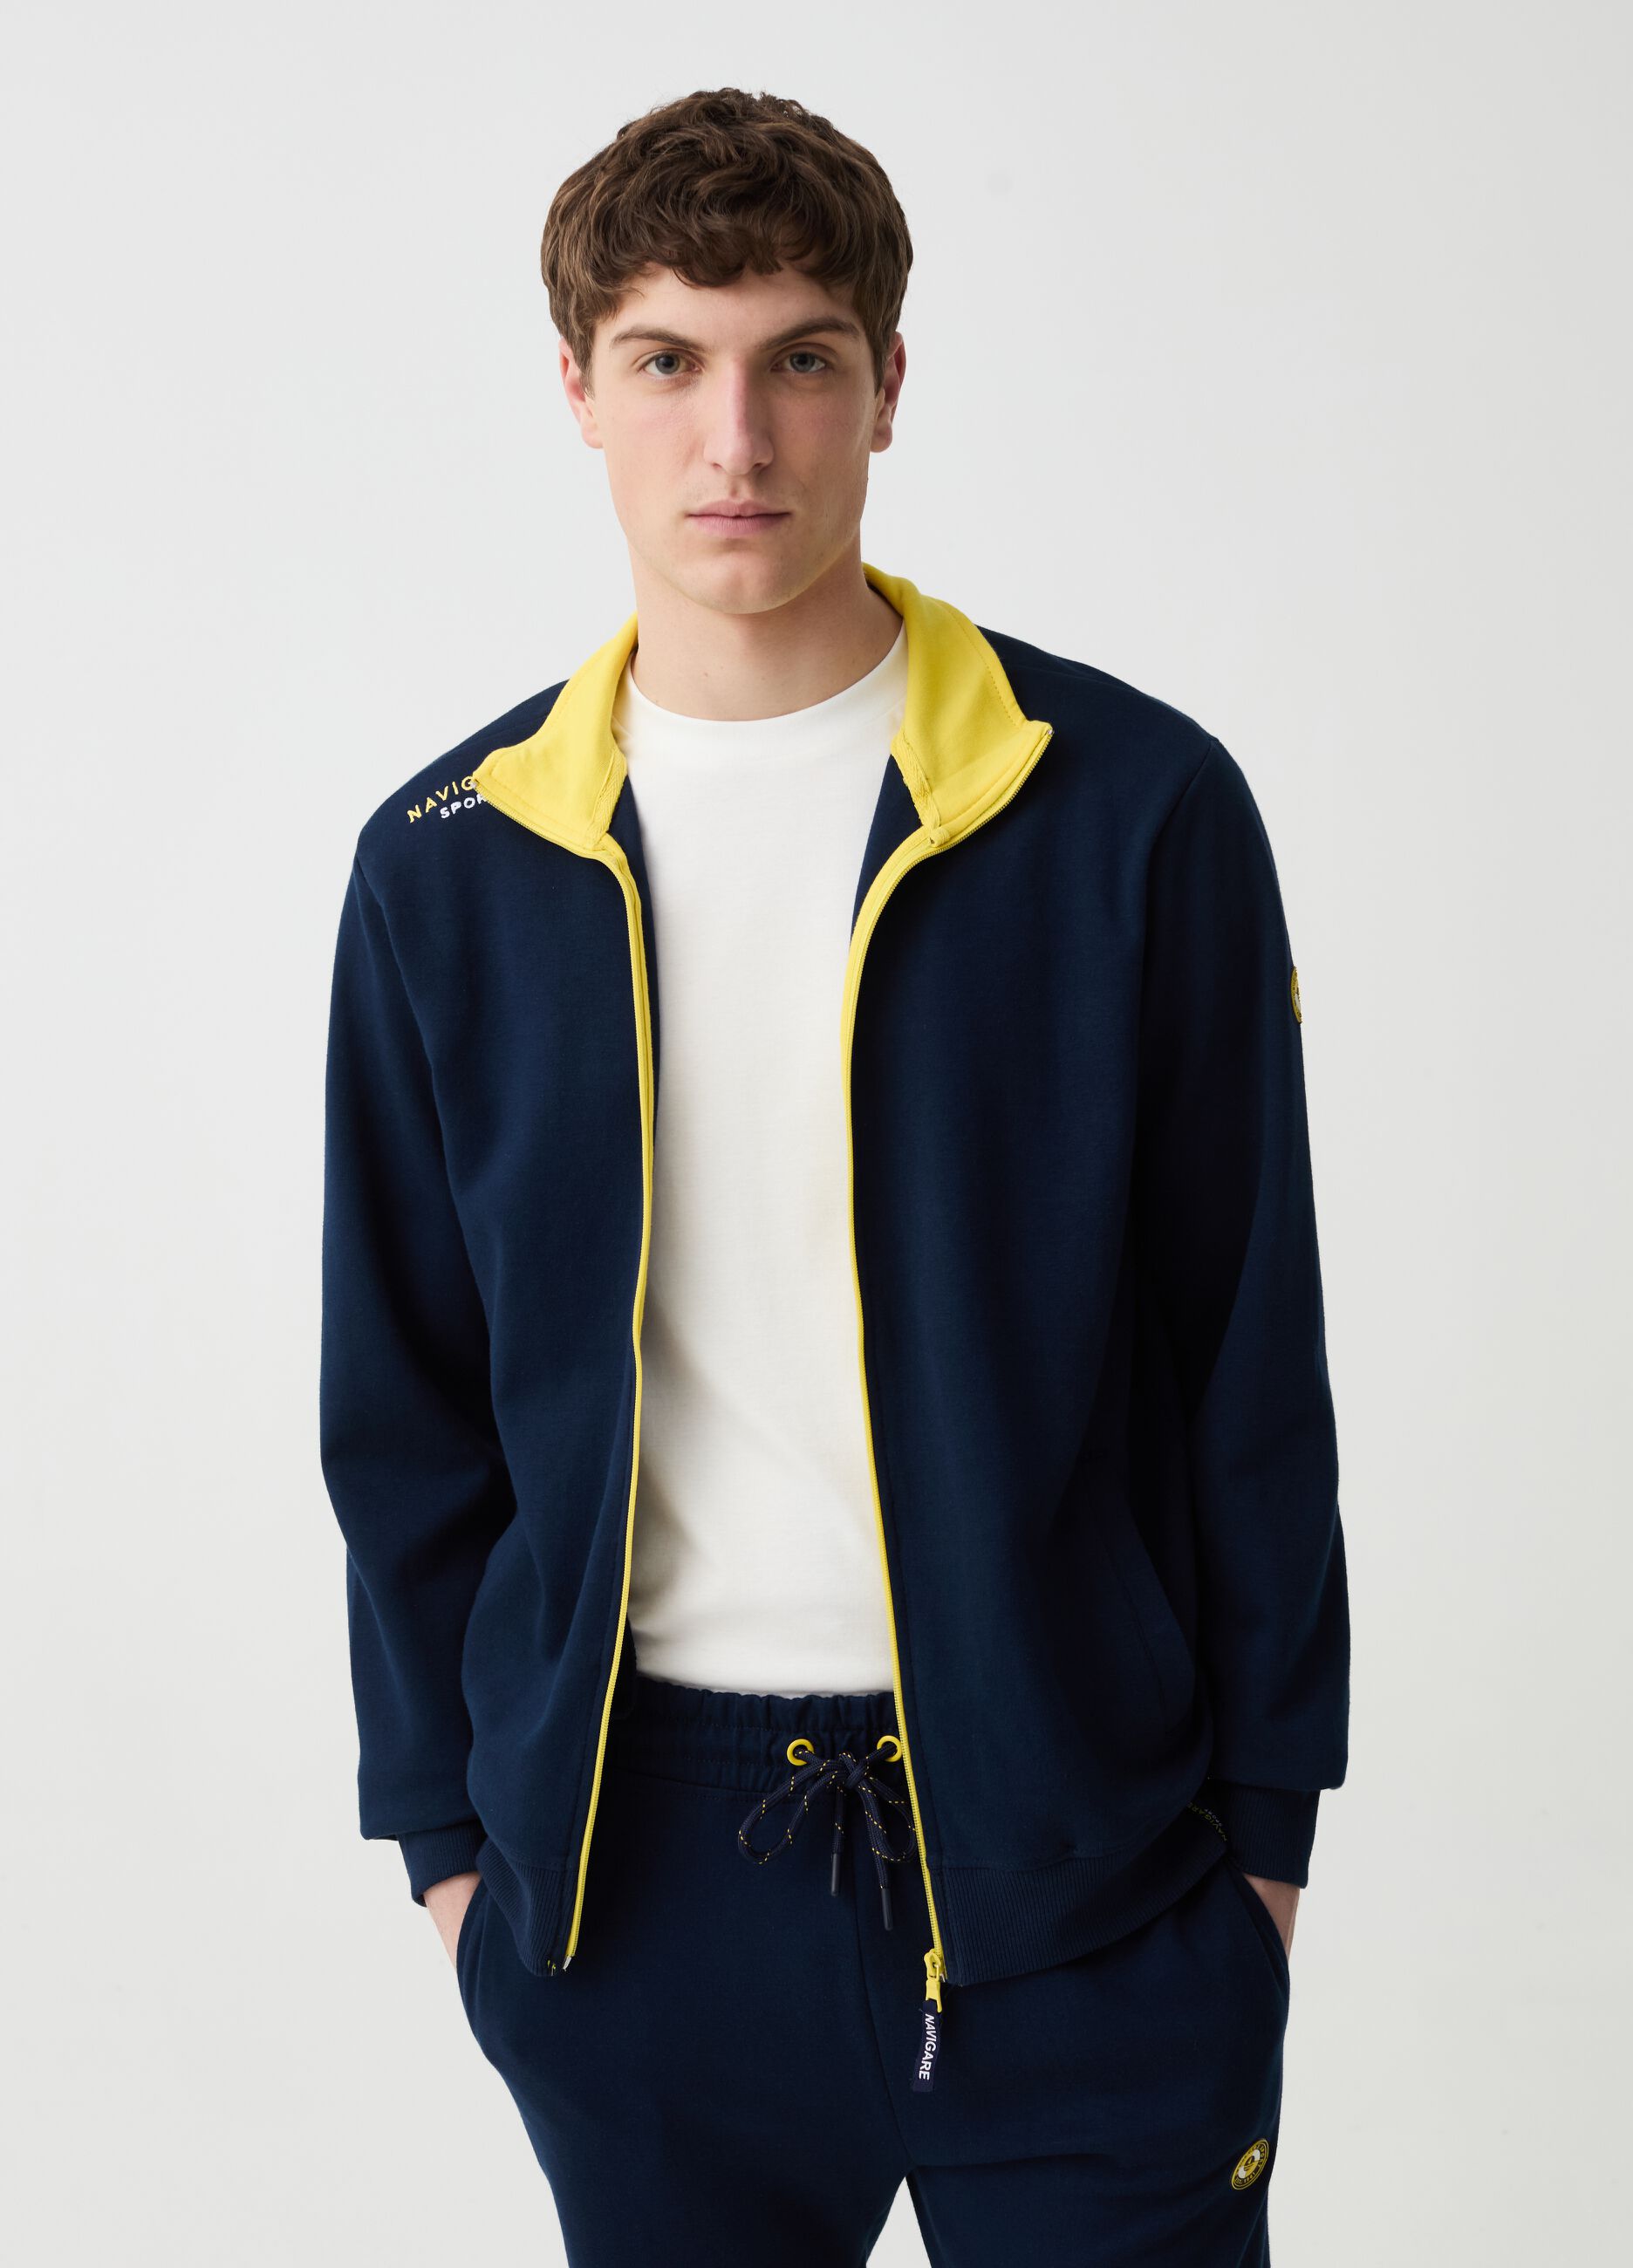 High neck, full-zip with Navigare Sport embroidery